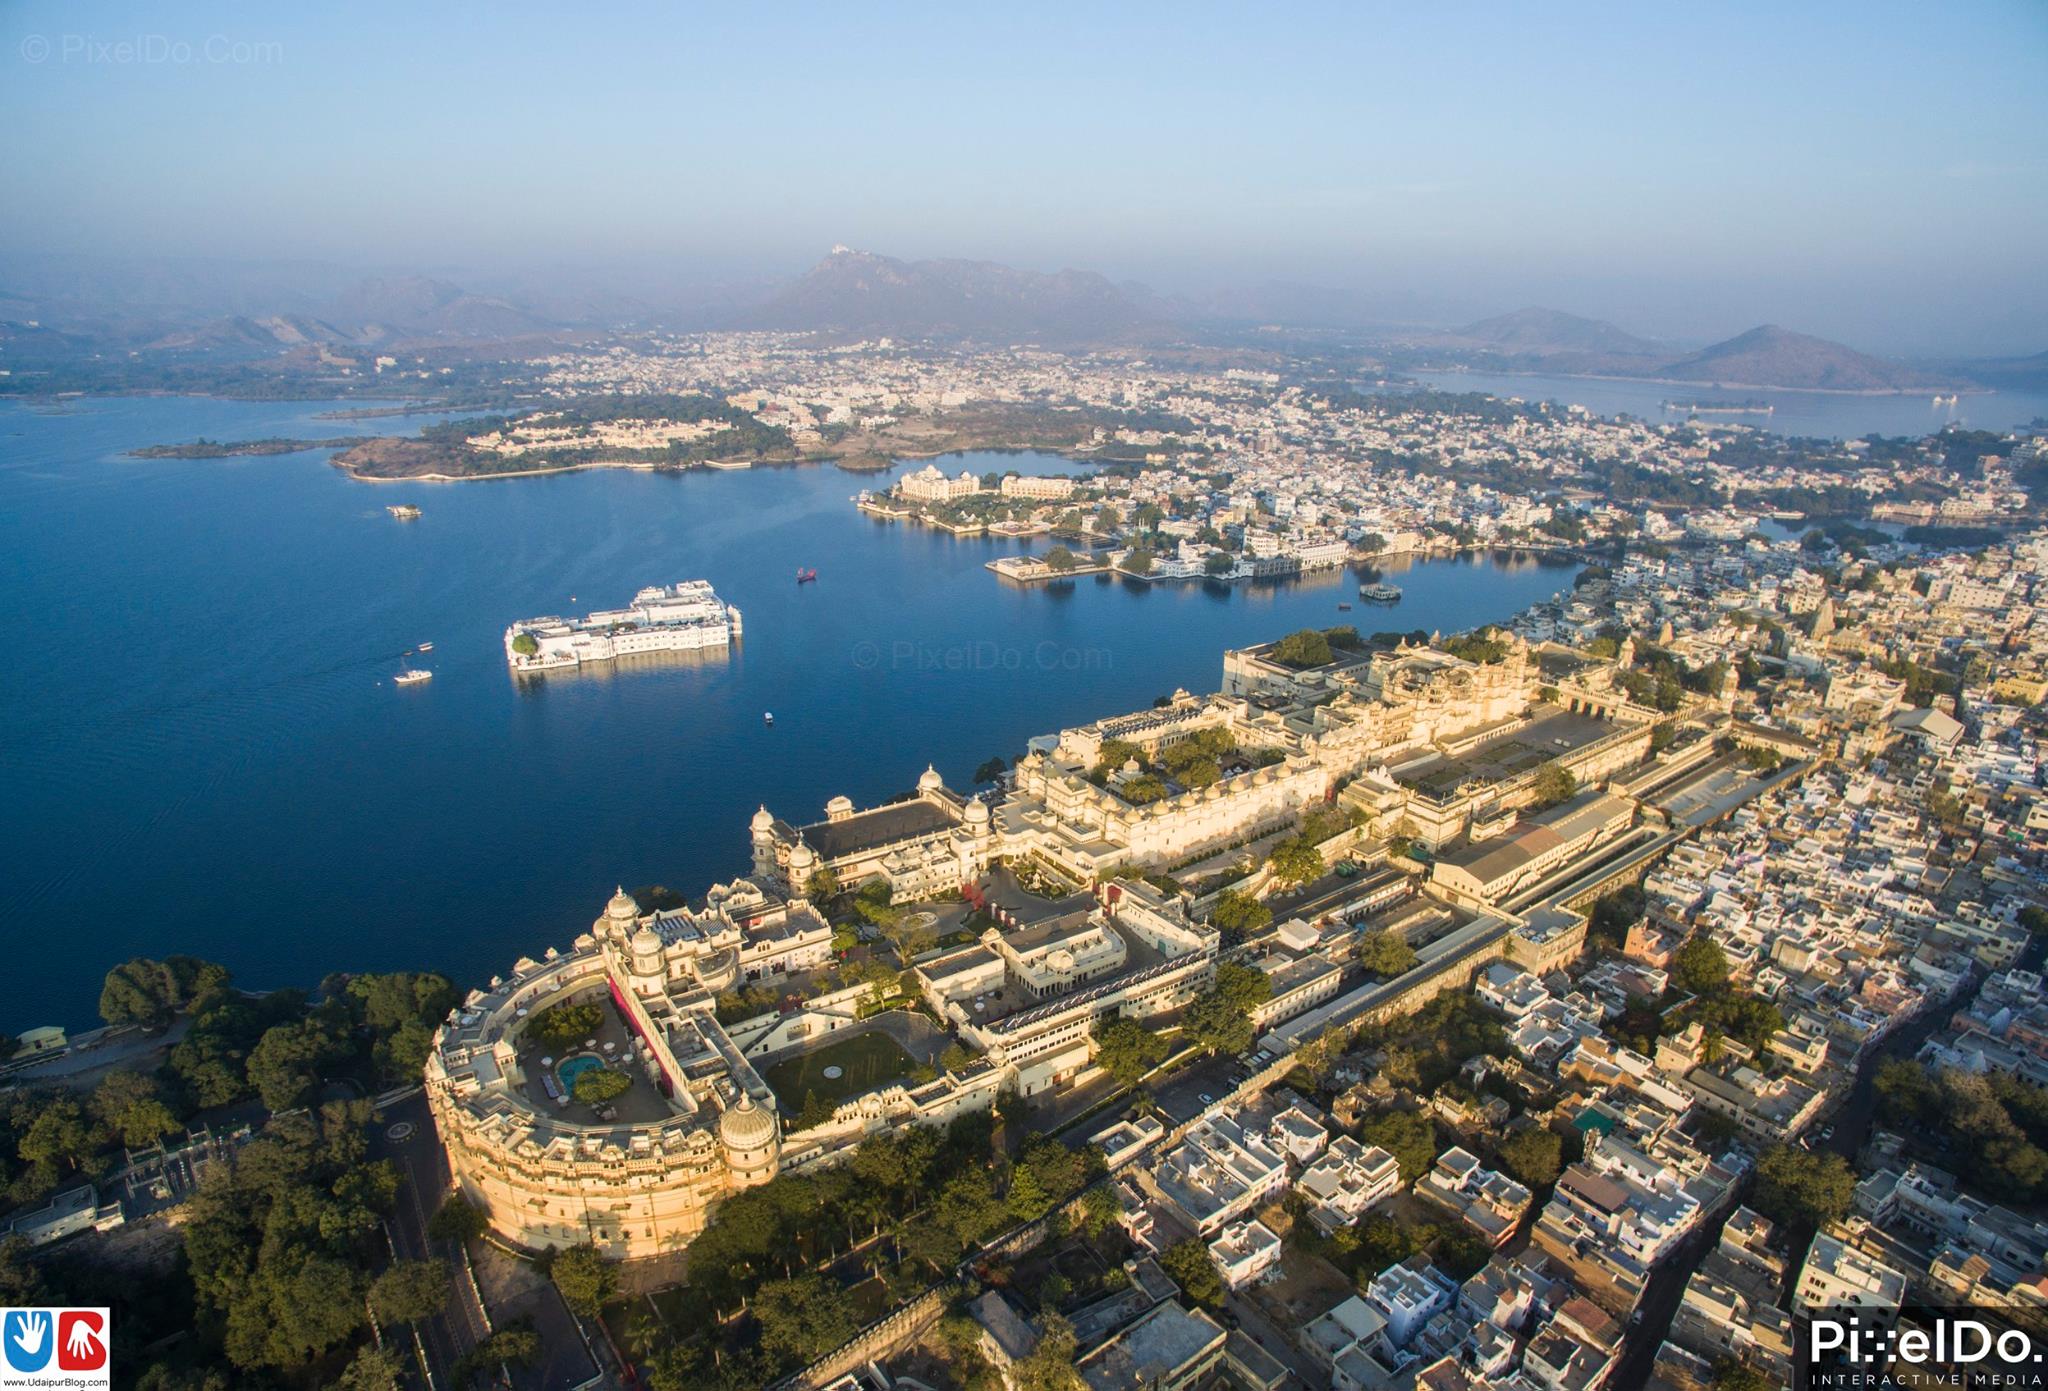 This Is The Most Amazing Aerial Video Of Any Indian City – Udaipur In 4K